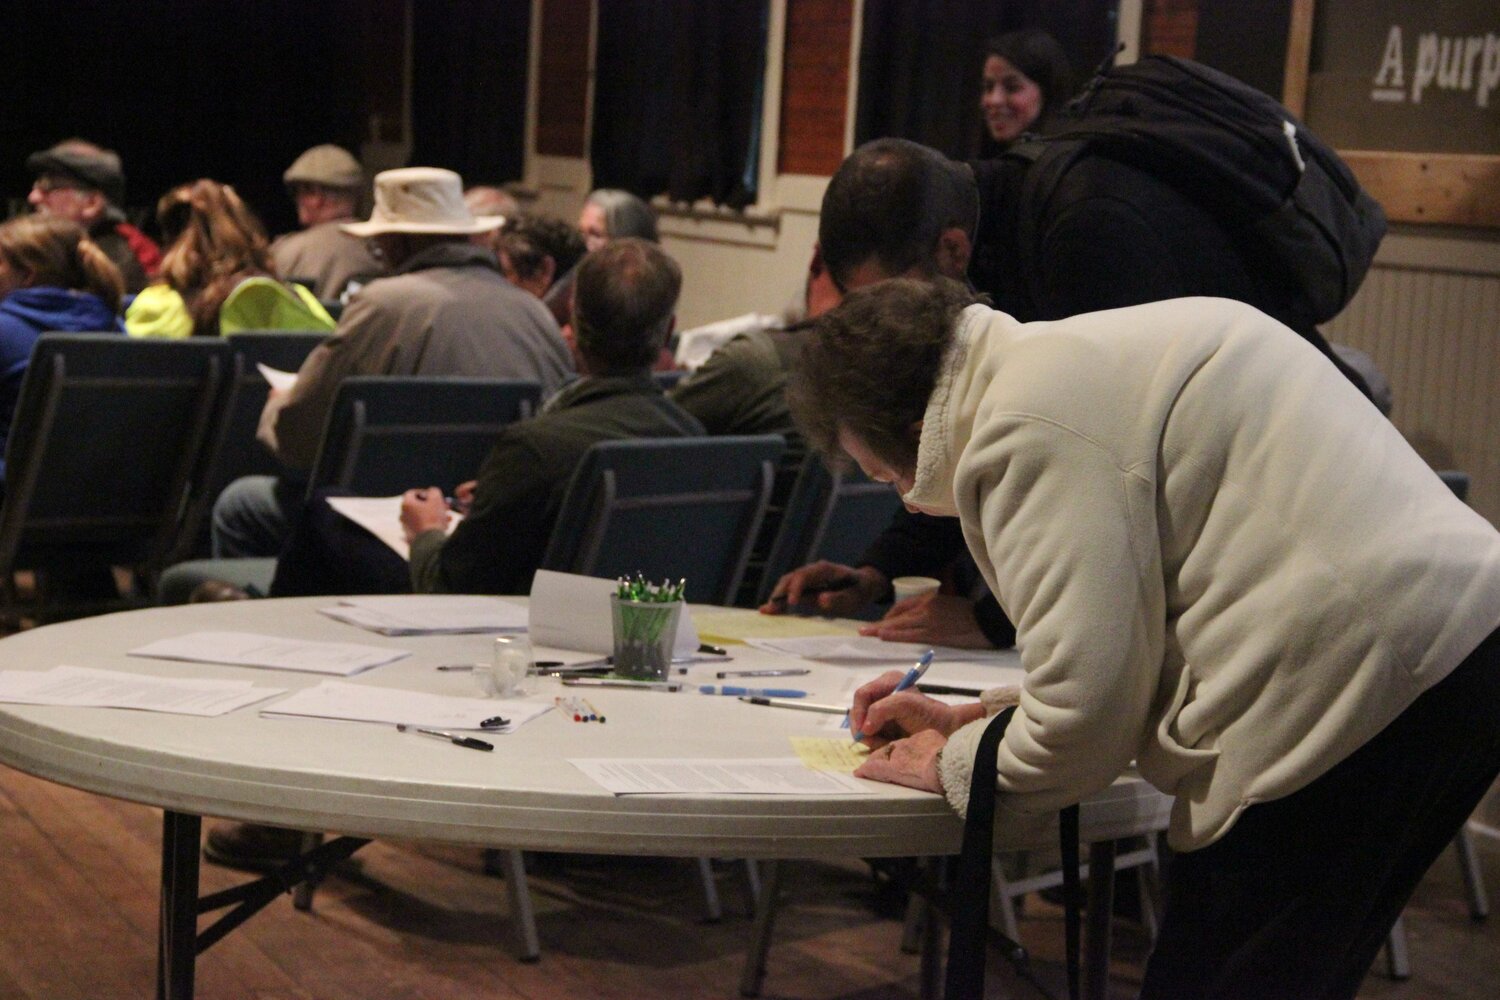 Over 100 people attended a meeting on Birch Bay incorporation at Christ the King North Bay Community Church on November 15. The group, which has been meeting since June, was formally established as the Birch Bay Incorporation Association during the meeting. Voters also approved city boundaries for a feasibility study and elected 15 steering committee members.